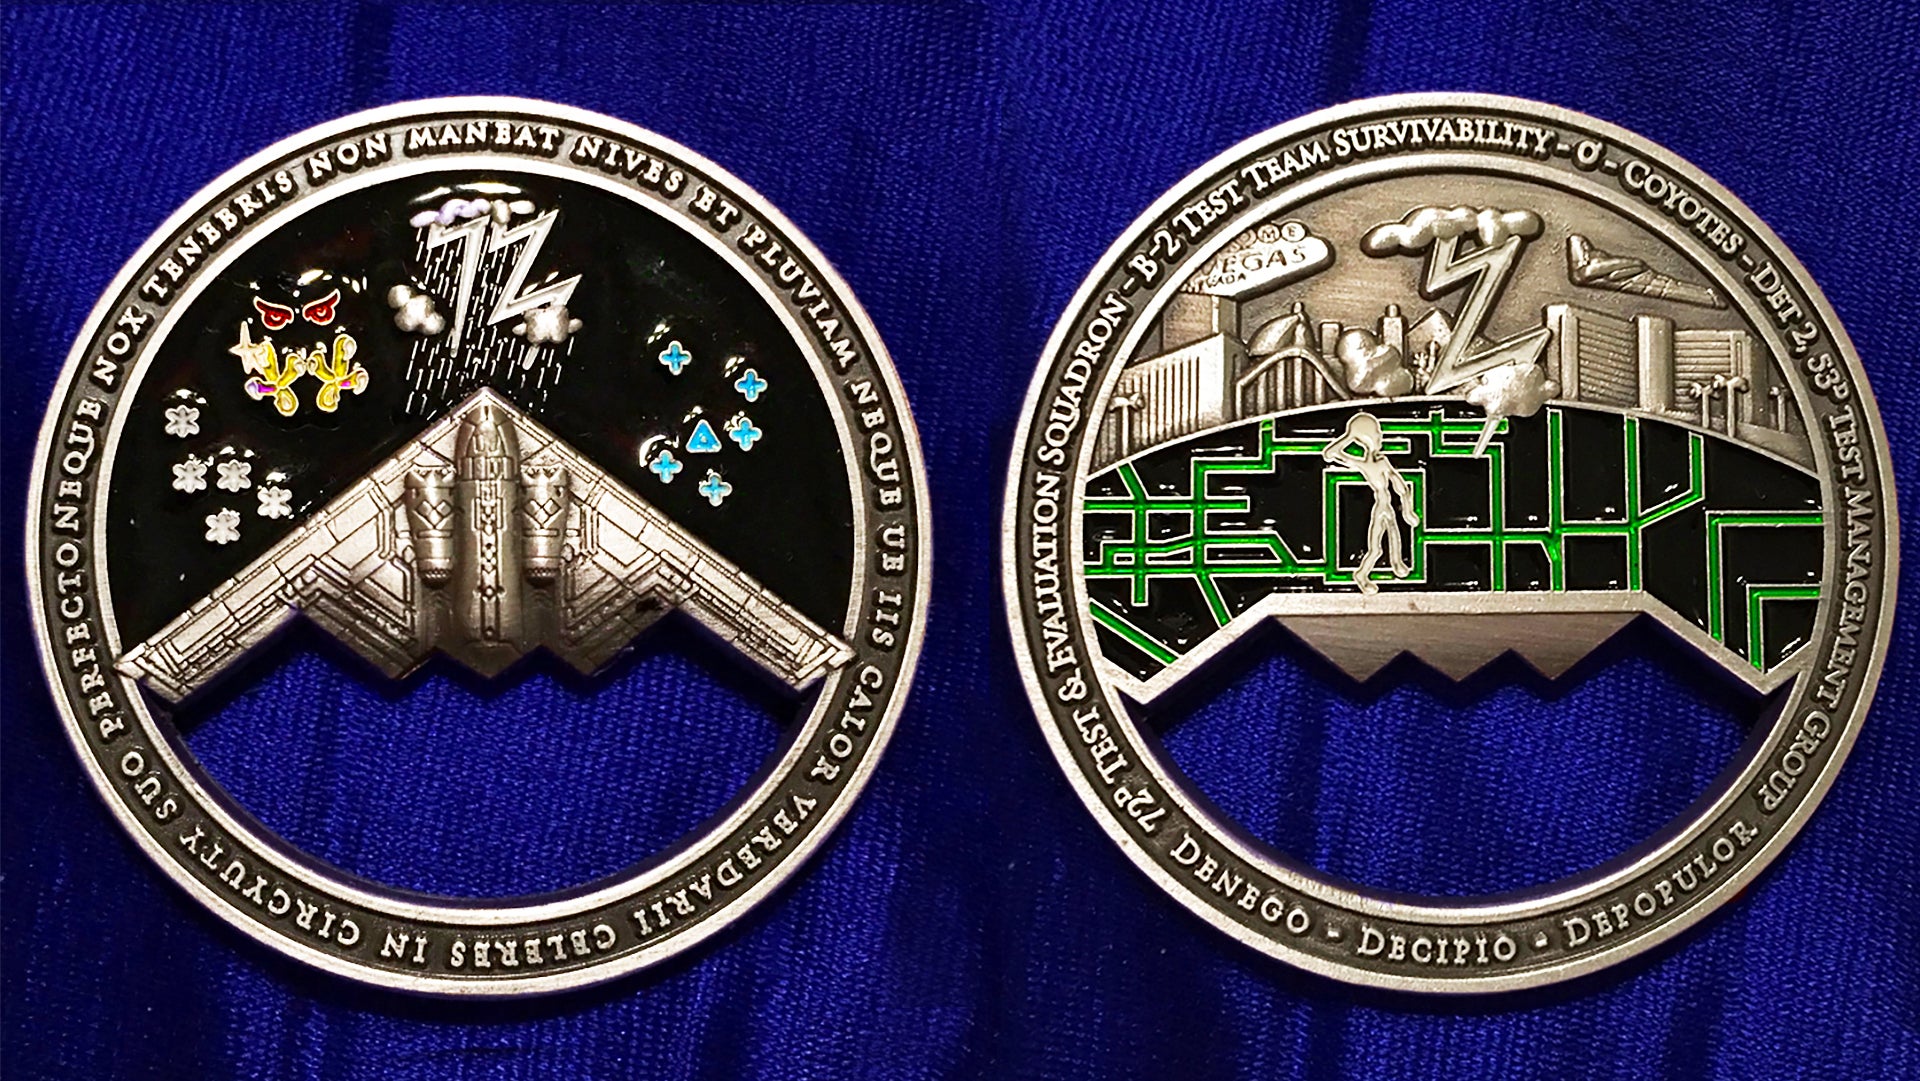 This Elite B-2 Stealth Bomber Test Unit's Challenge Coin May Be The